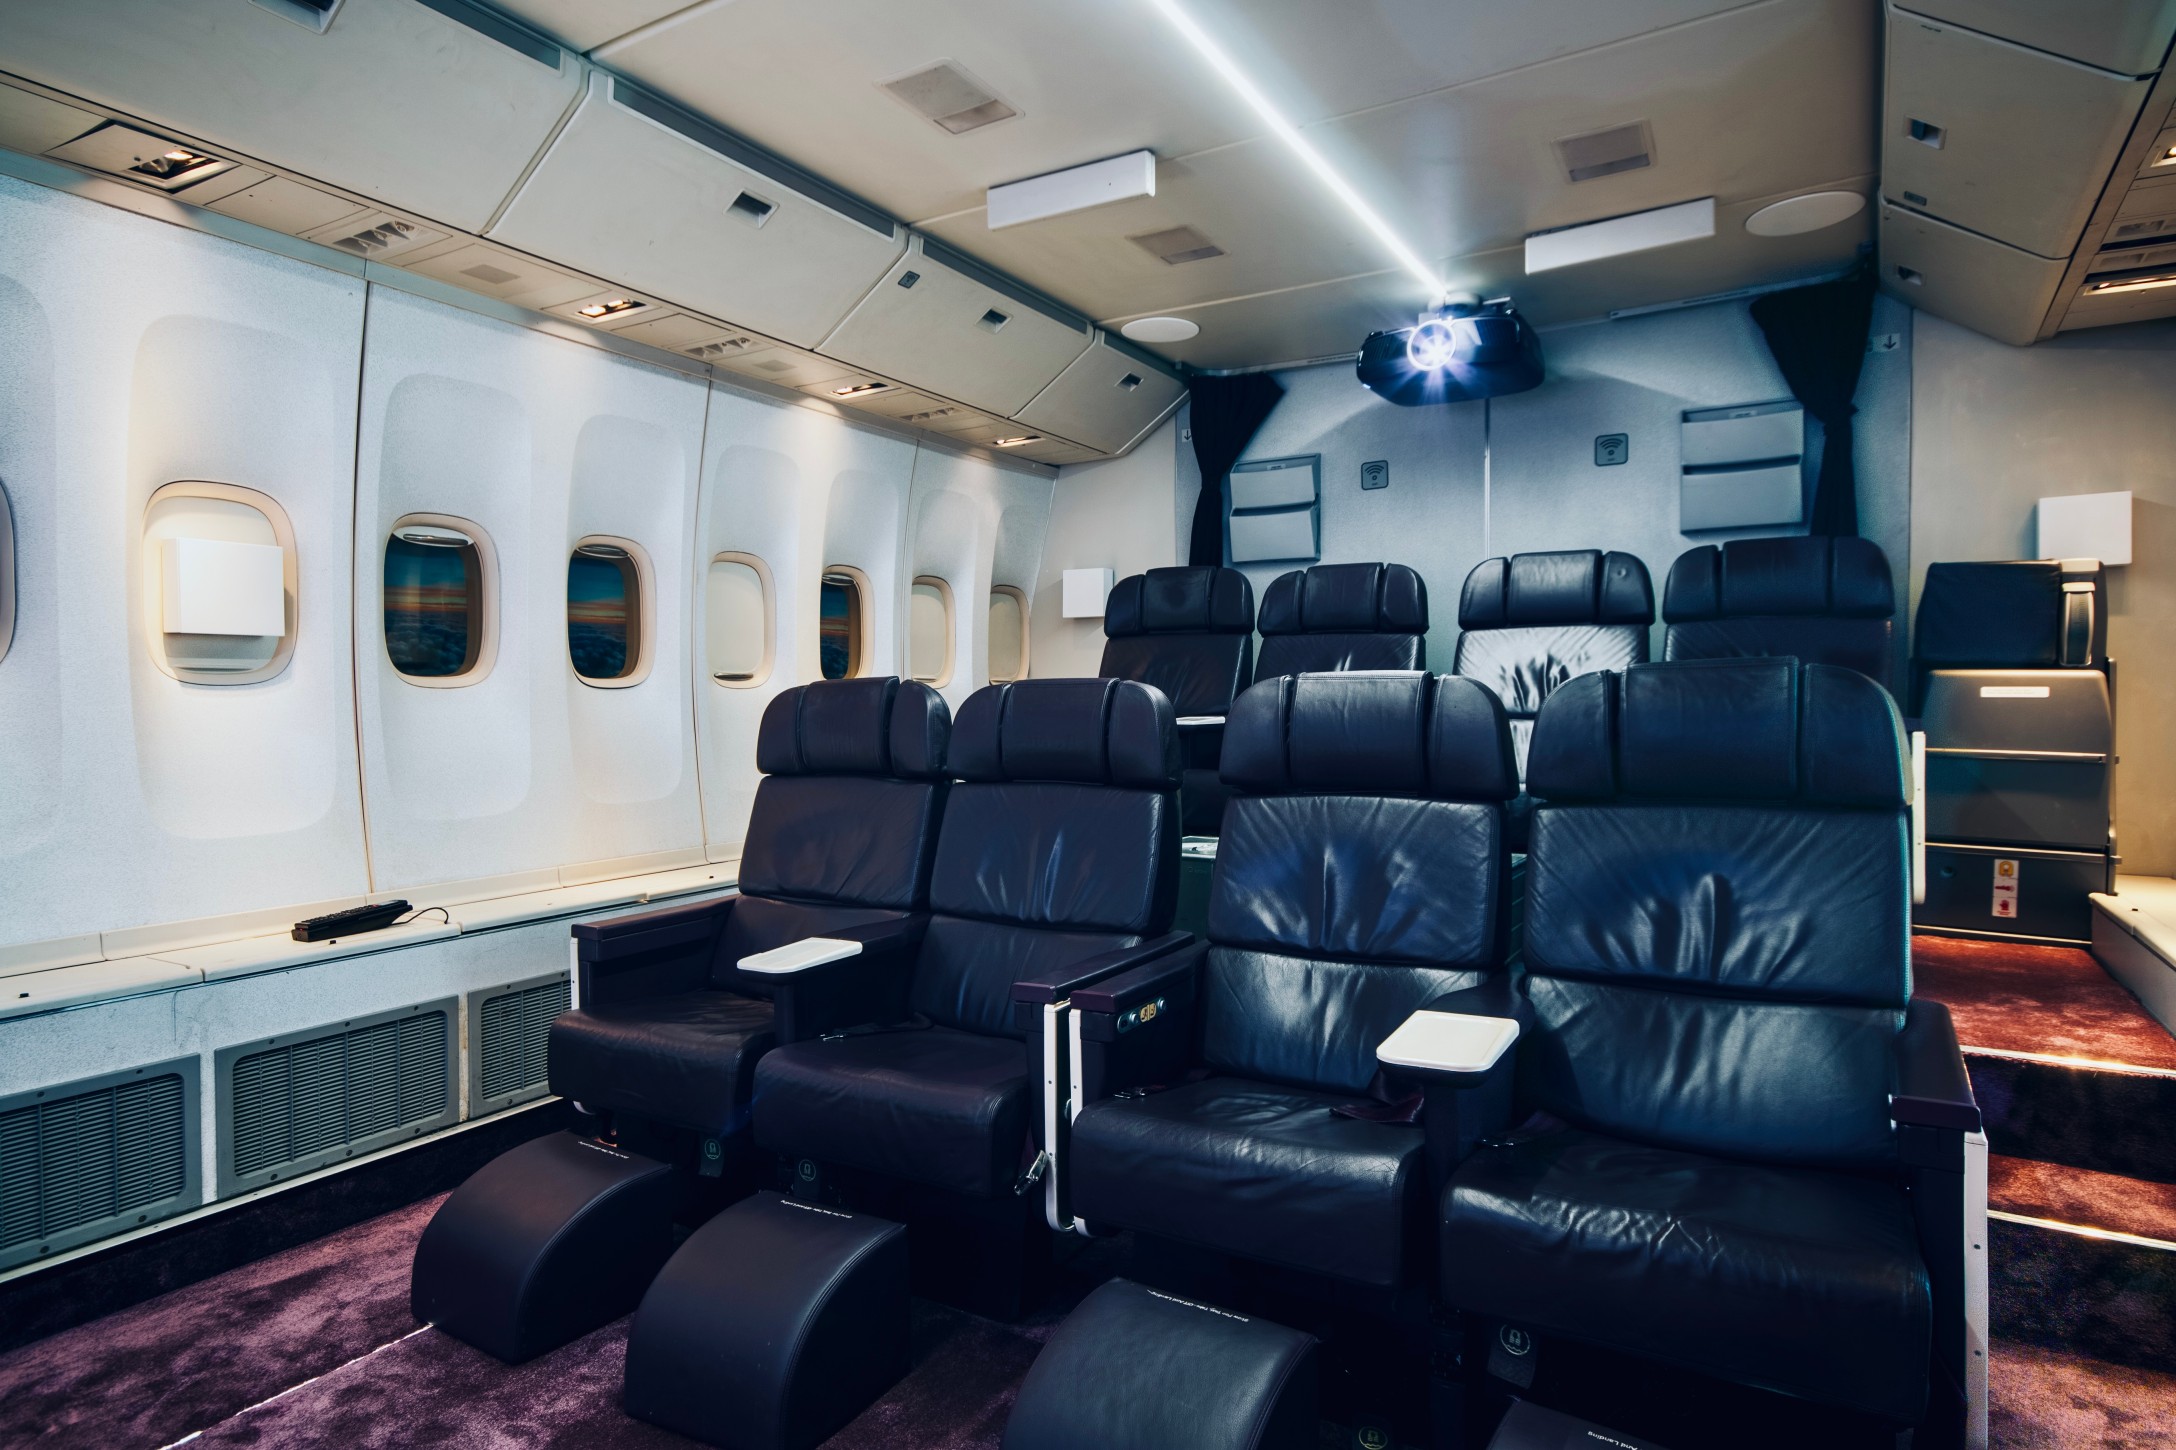 Angle of Home Cinema room made from decommissioned aircraft showing aircraft cinema chairs and projector